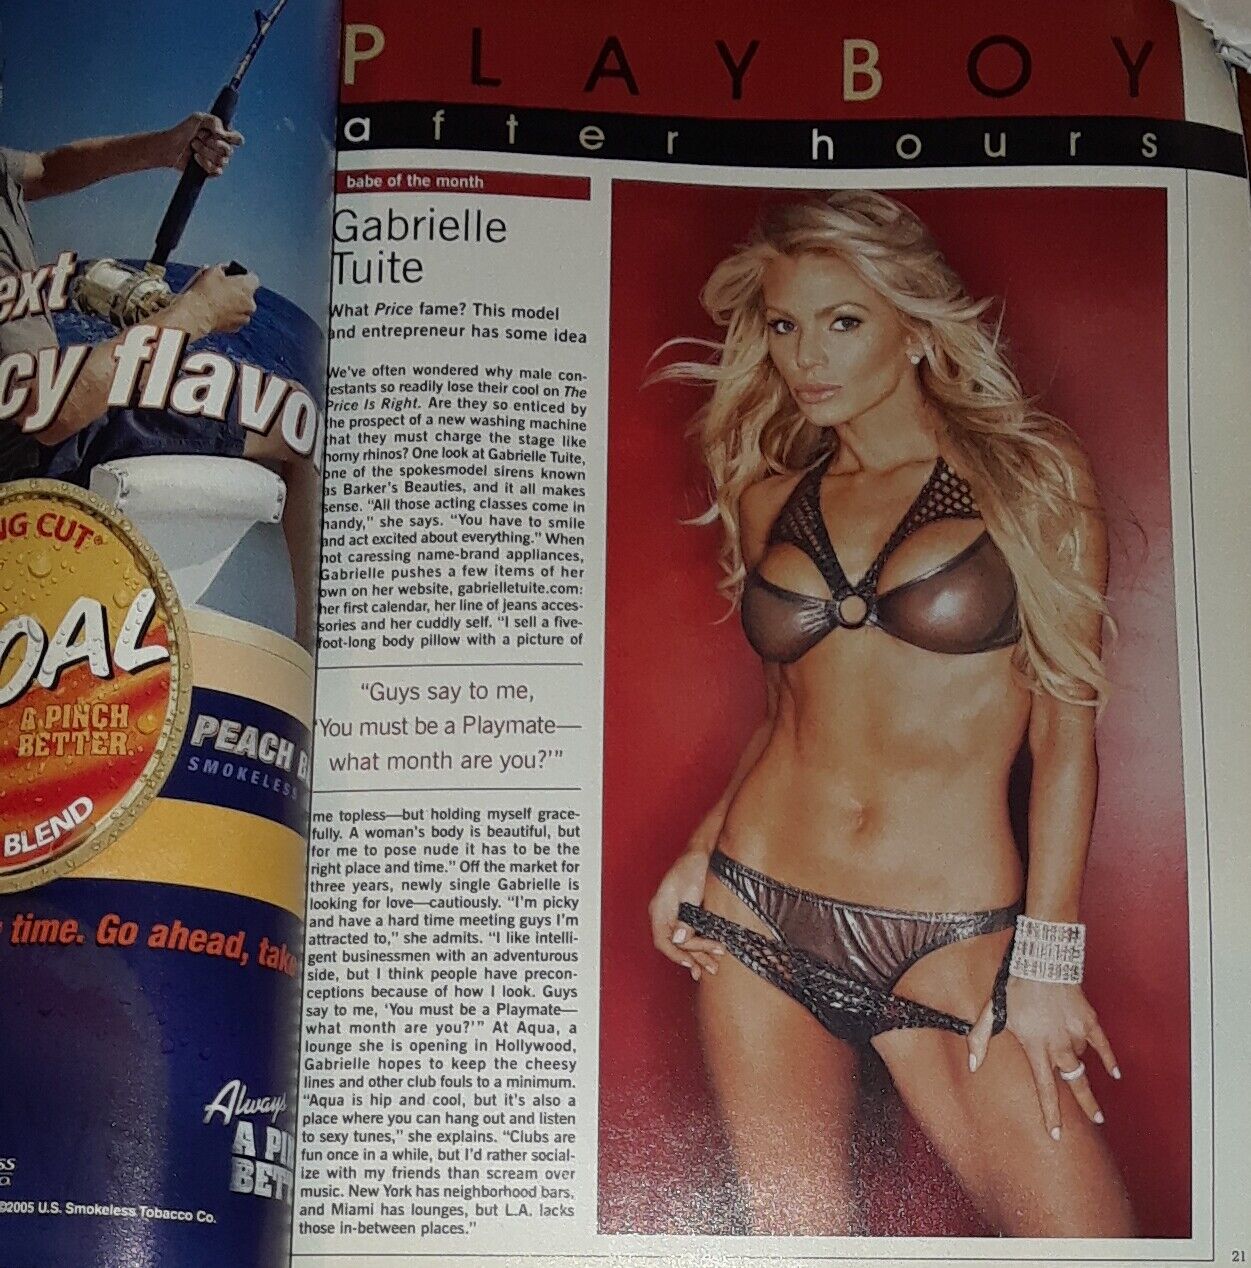 Playboy Magazine September 2005 Pull Out Centerfold ☆Jessica Canseco (Joseand#039;s Ex) eBay billede